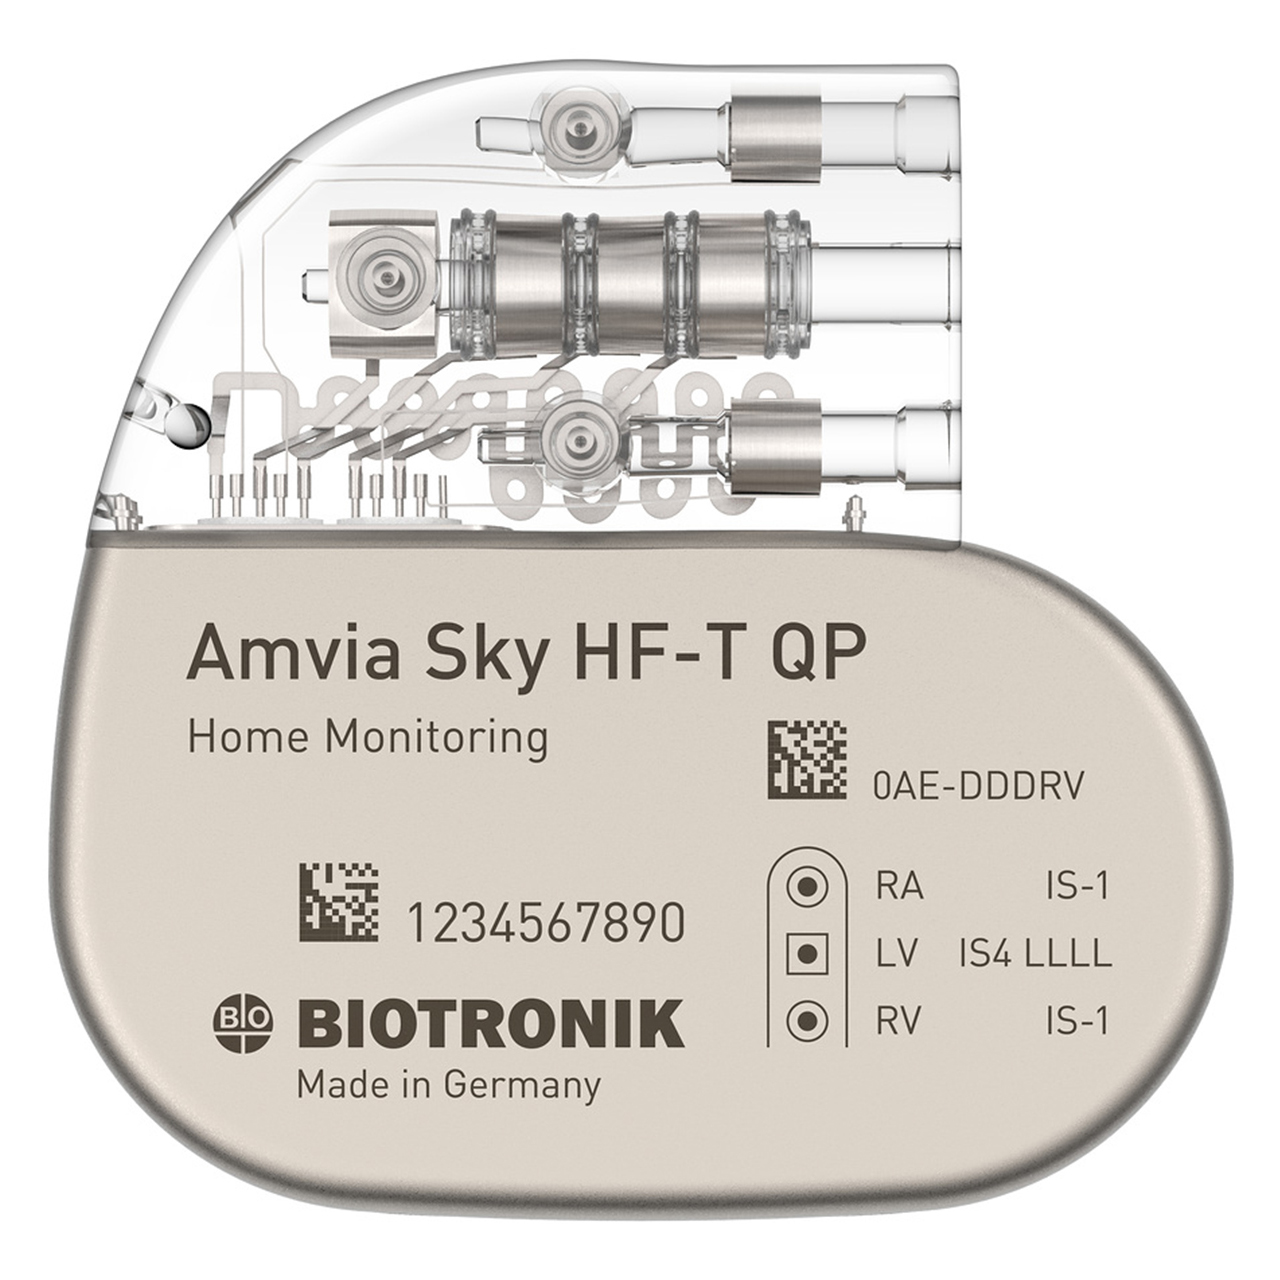 Amvia Sky HF-T CRT Pacemaker, frontal